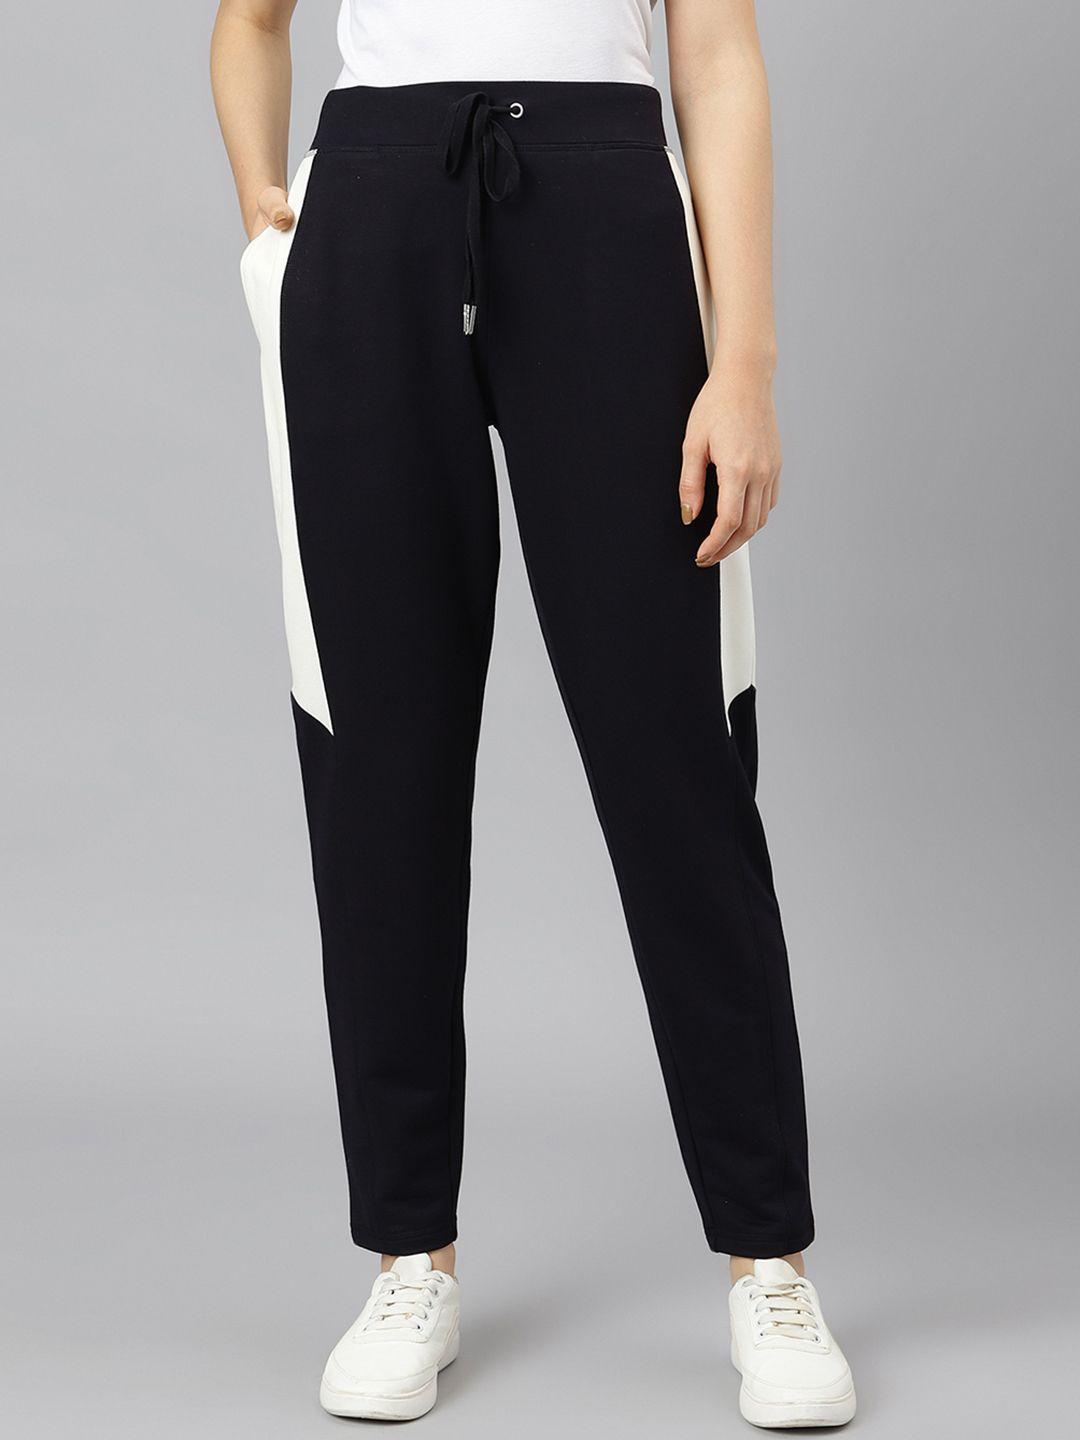 beverly hills polo club women black & white colorblocked track pants